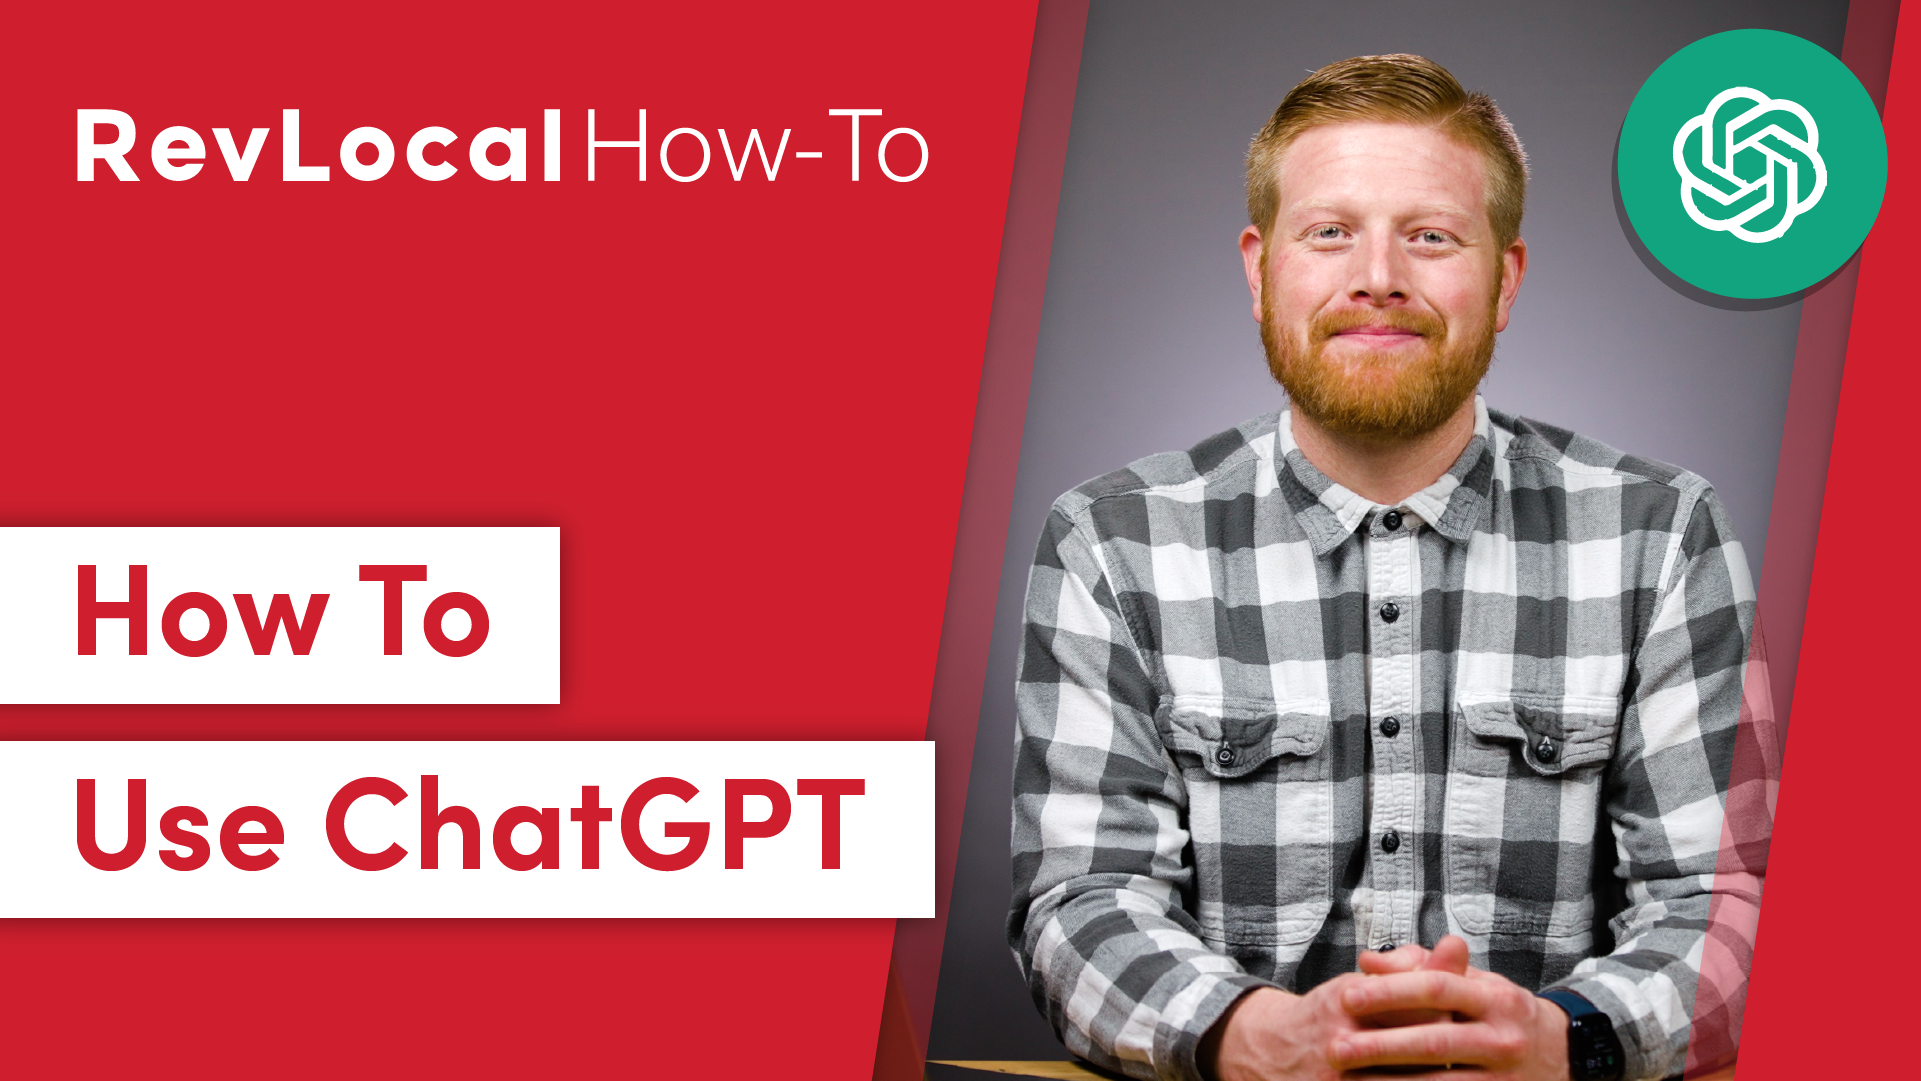 Watch this video to learn about ChatGPT